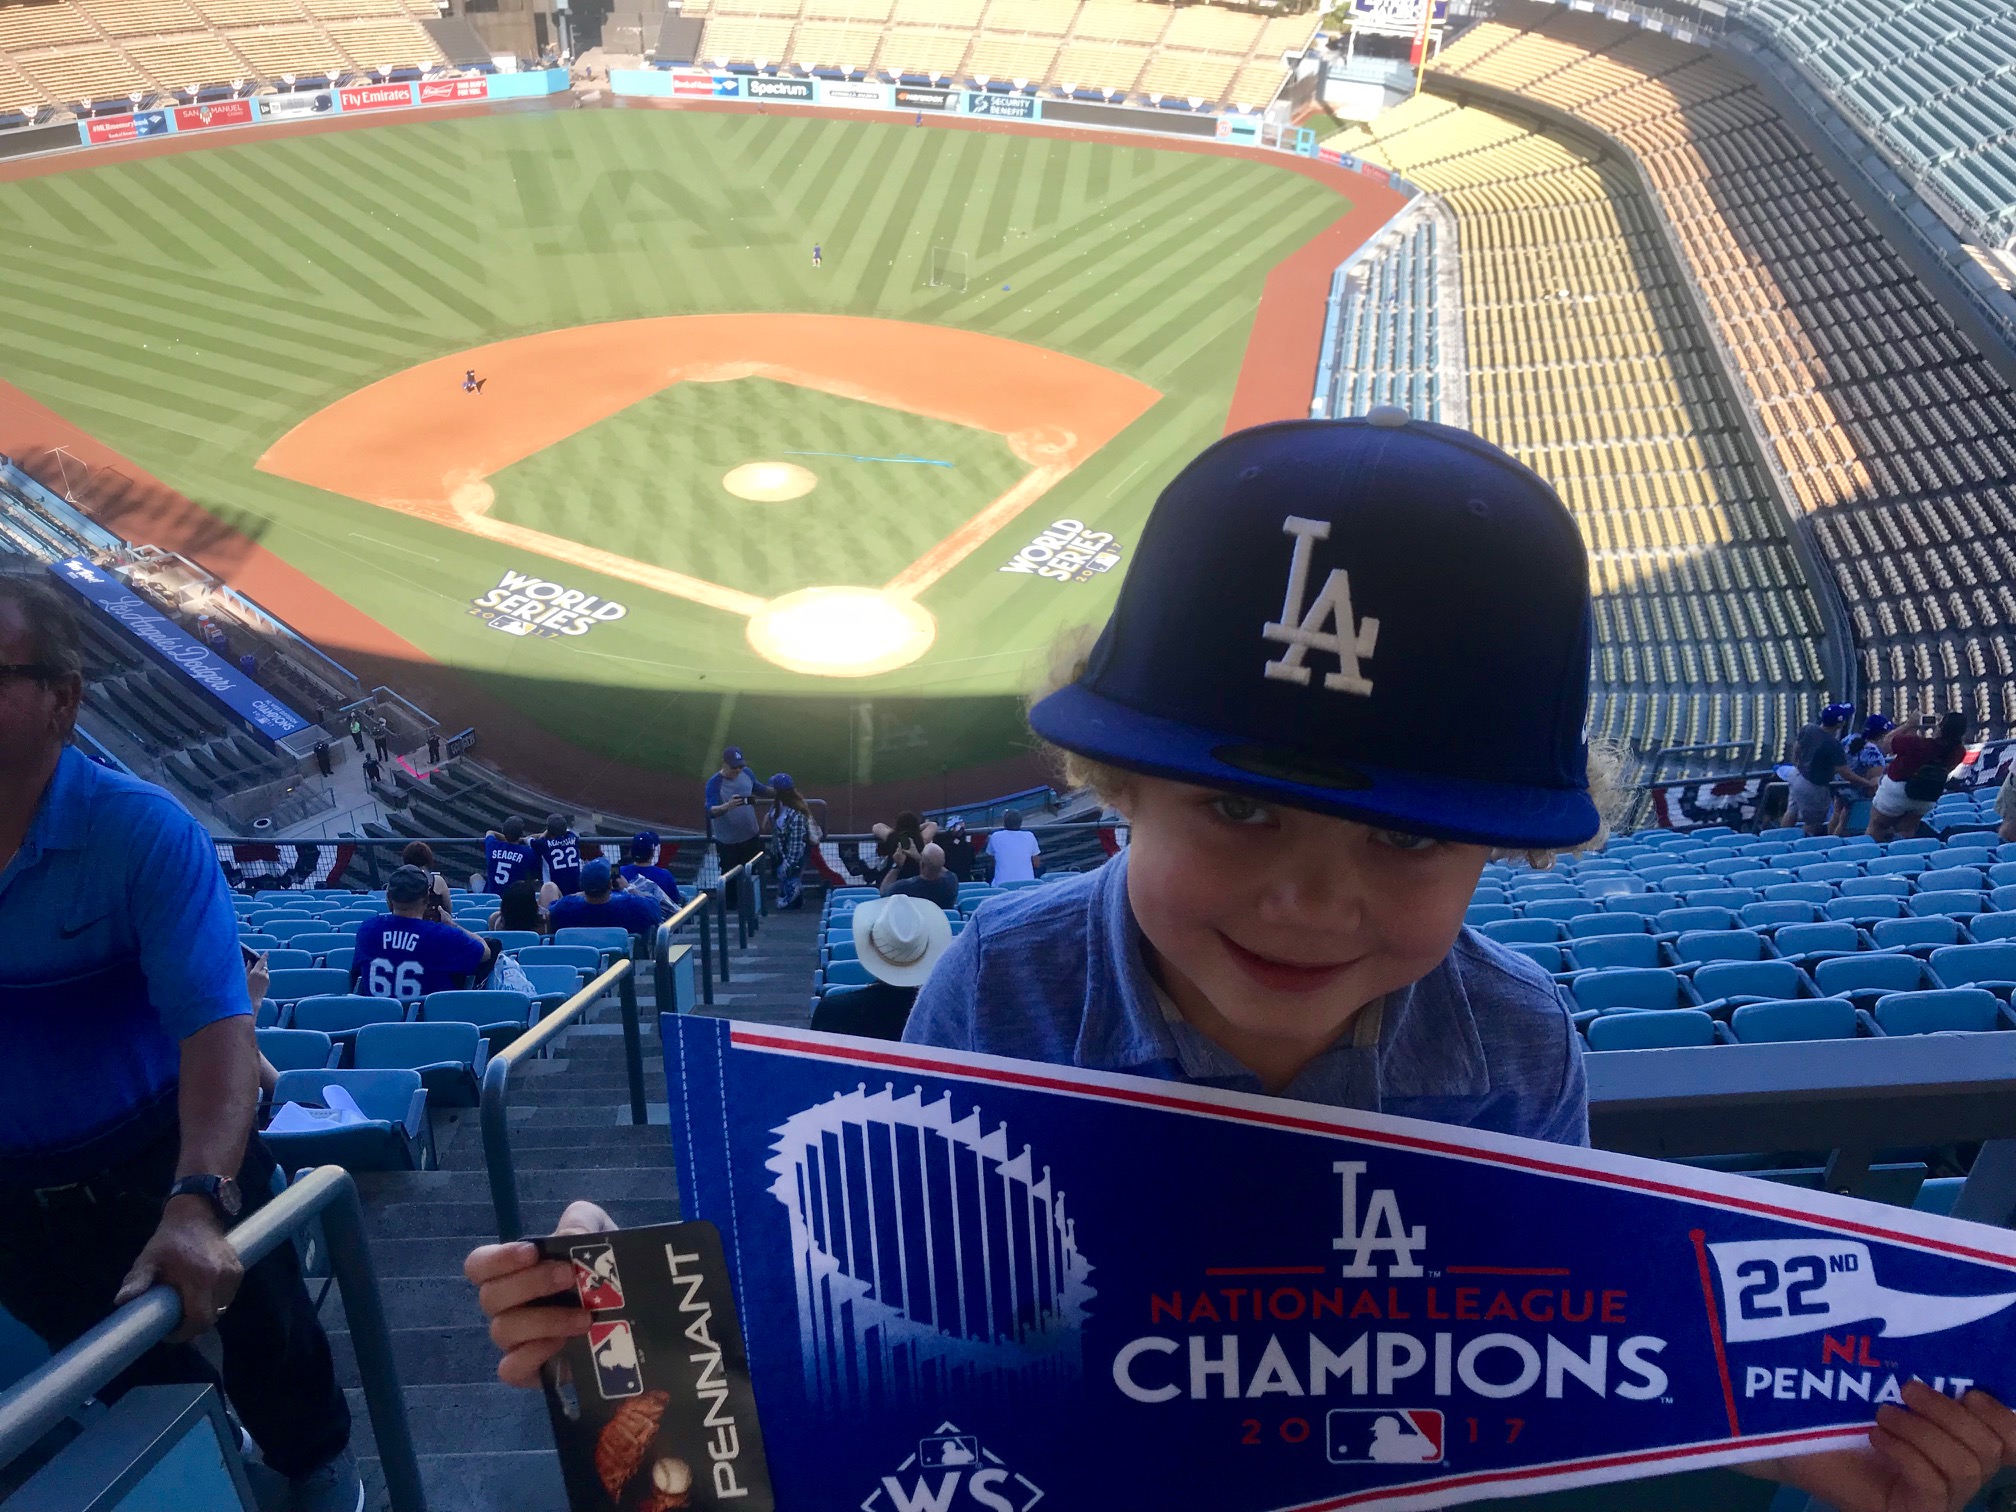 Ultimate Guide & How To Watch 2023 Dodgers FanFest At Dodger Stadium 